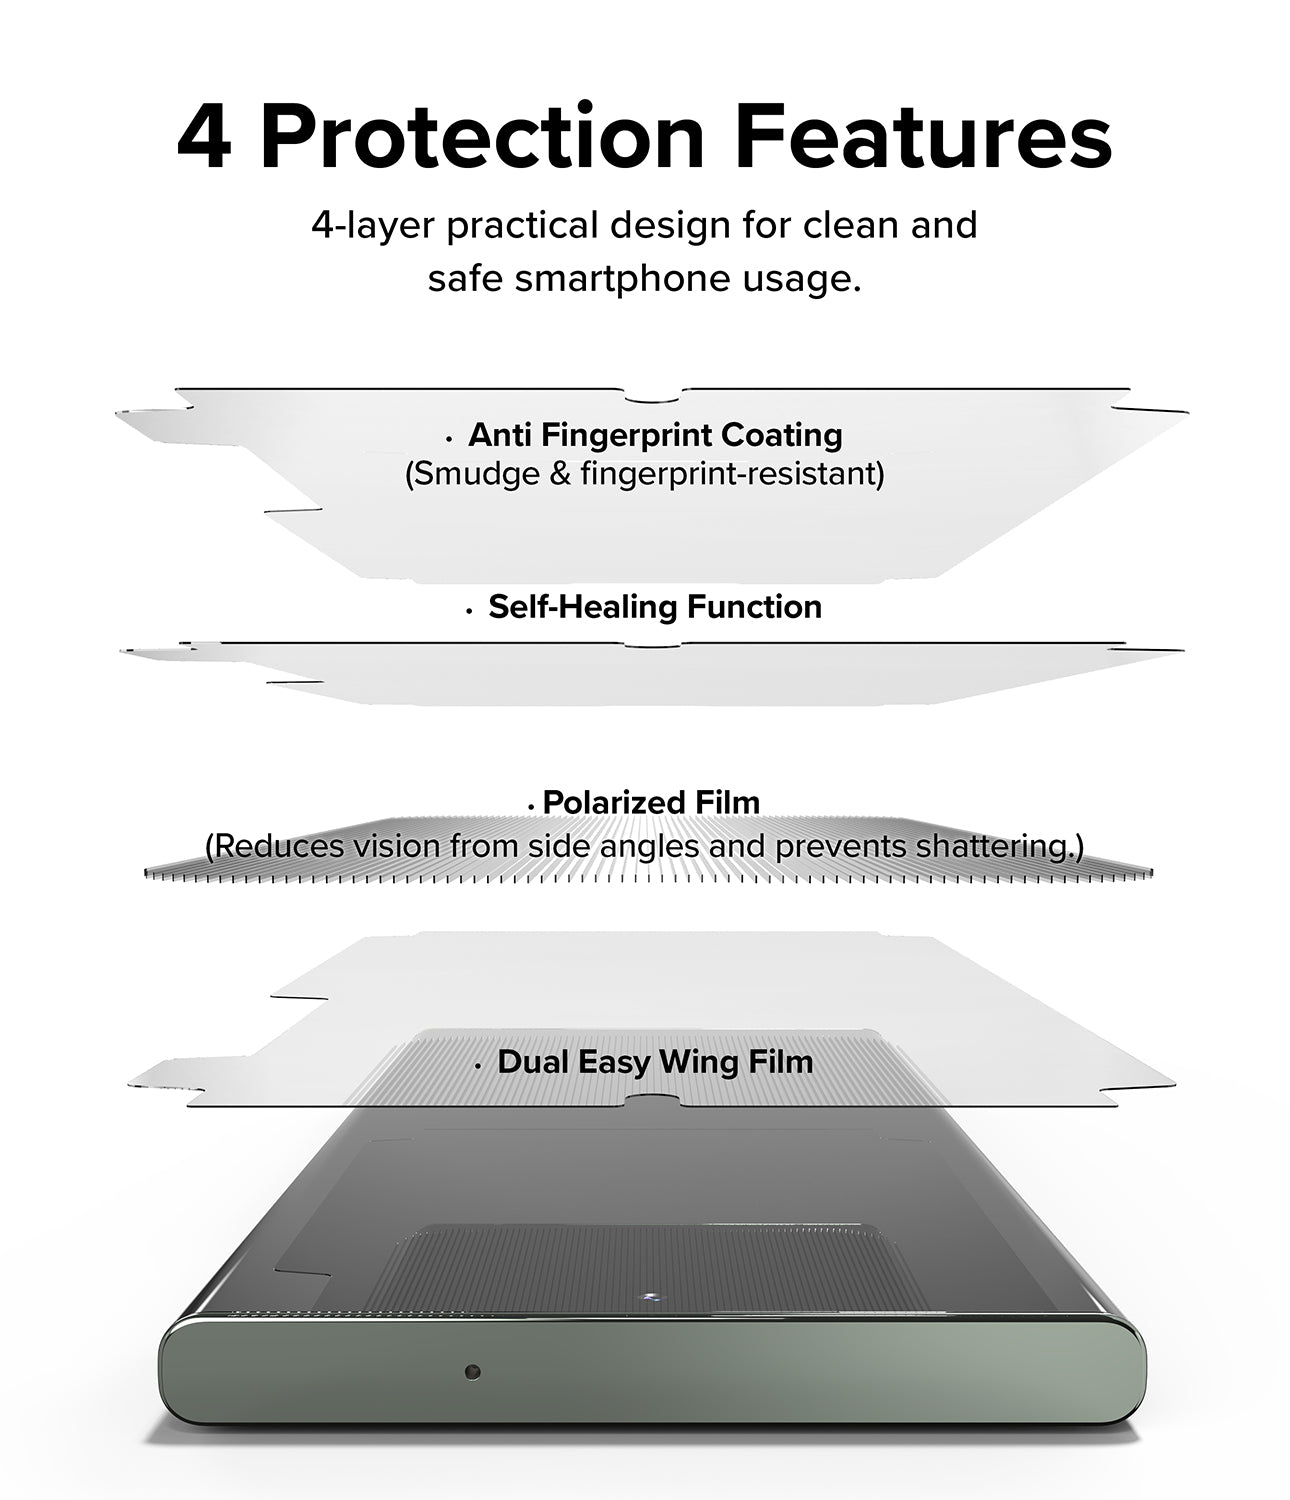 4 Protection Features l 4-layer practical design for clean and safe smartphone usage. Anti Fingerprint Coating (Smudge & fingerprint-resistant) / Self-Healing Function / Polarized Film (Reduces vision from side angles and prevents shattering.) / Dual Easy Wing Film